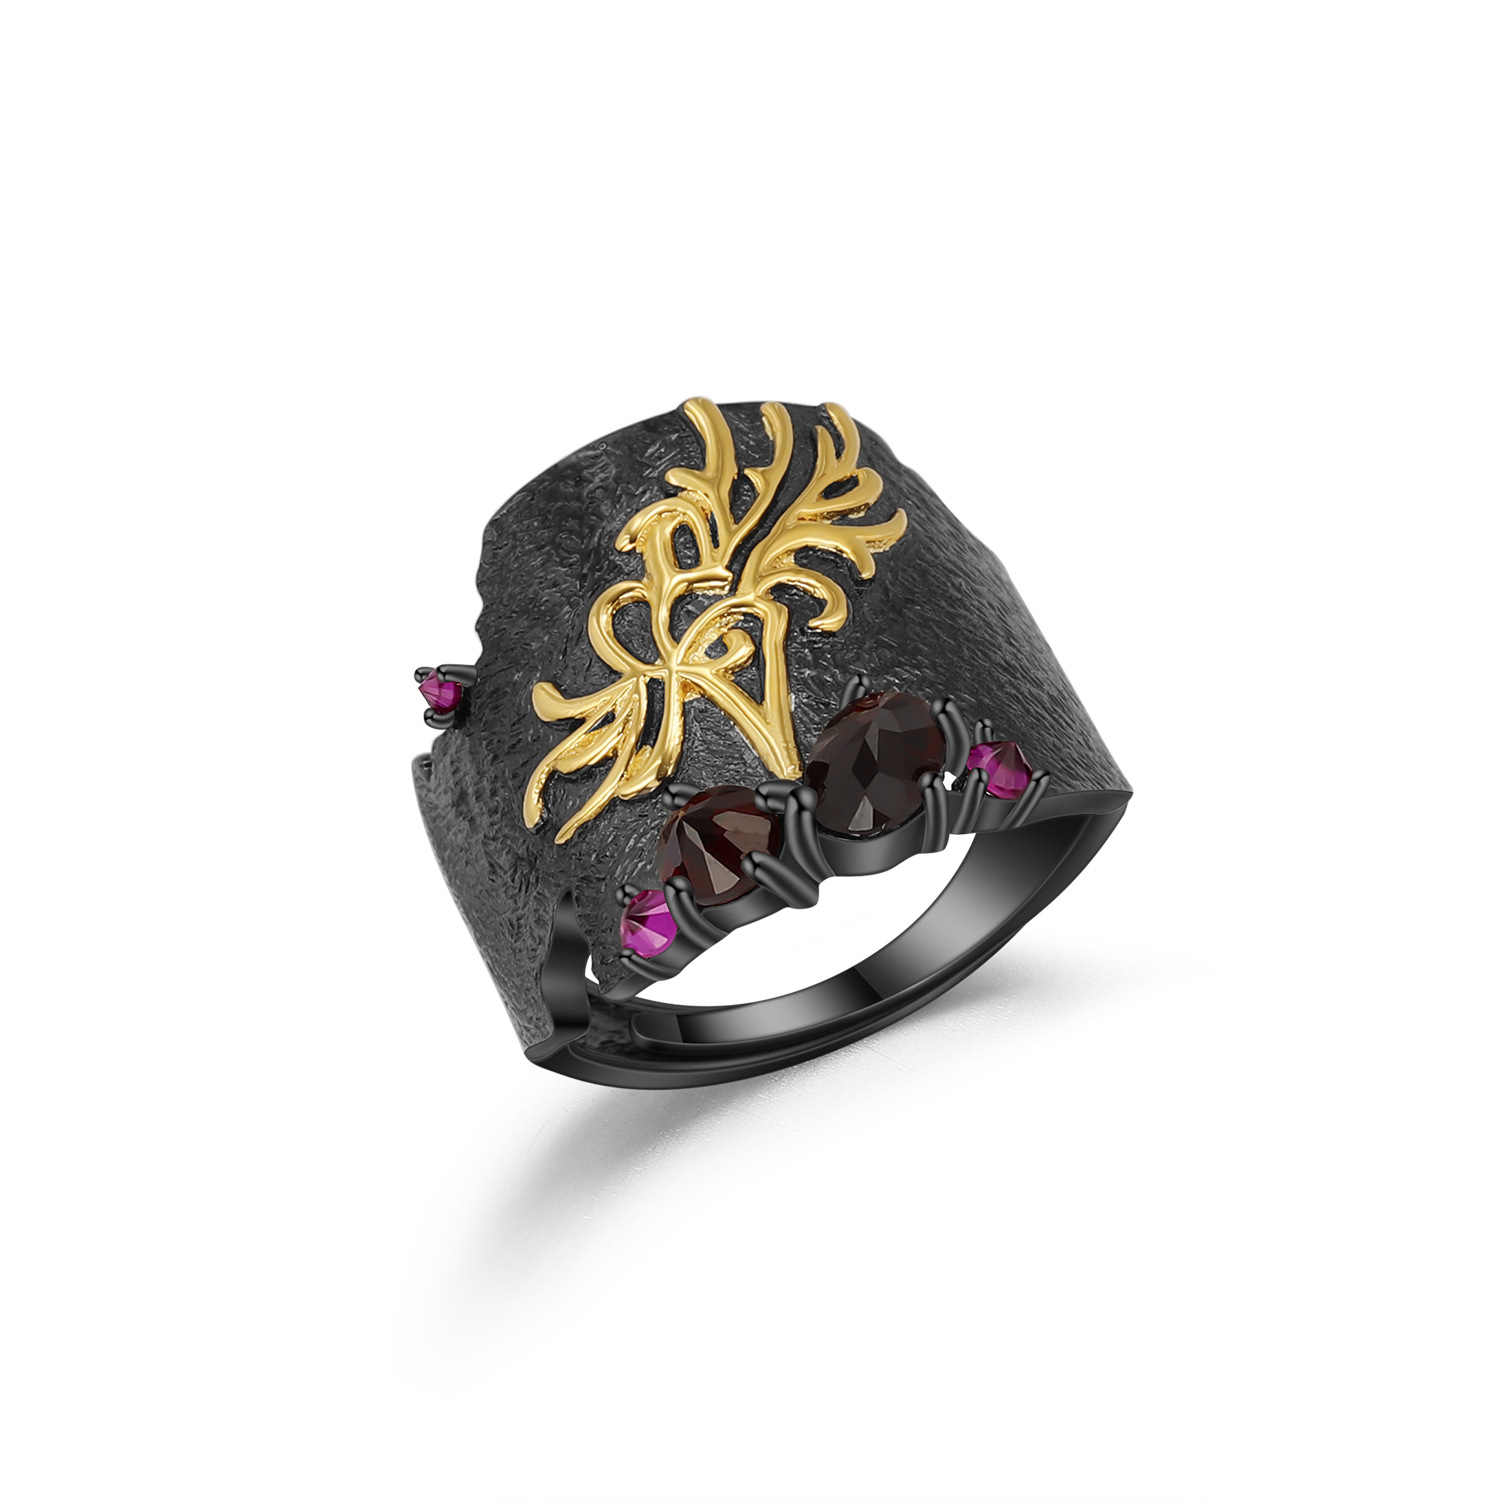 Promise Jewelry gift Gracious hostess gift Statement ring Exquisite craftsmanship Resistant to corrosion